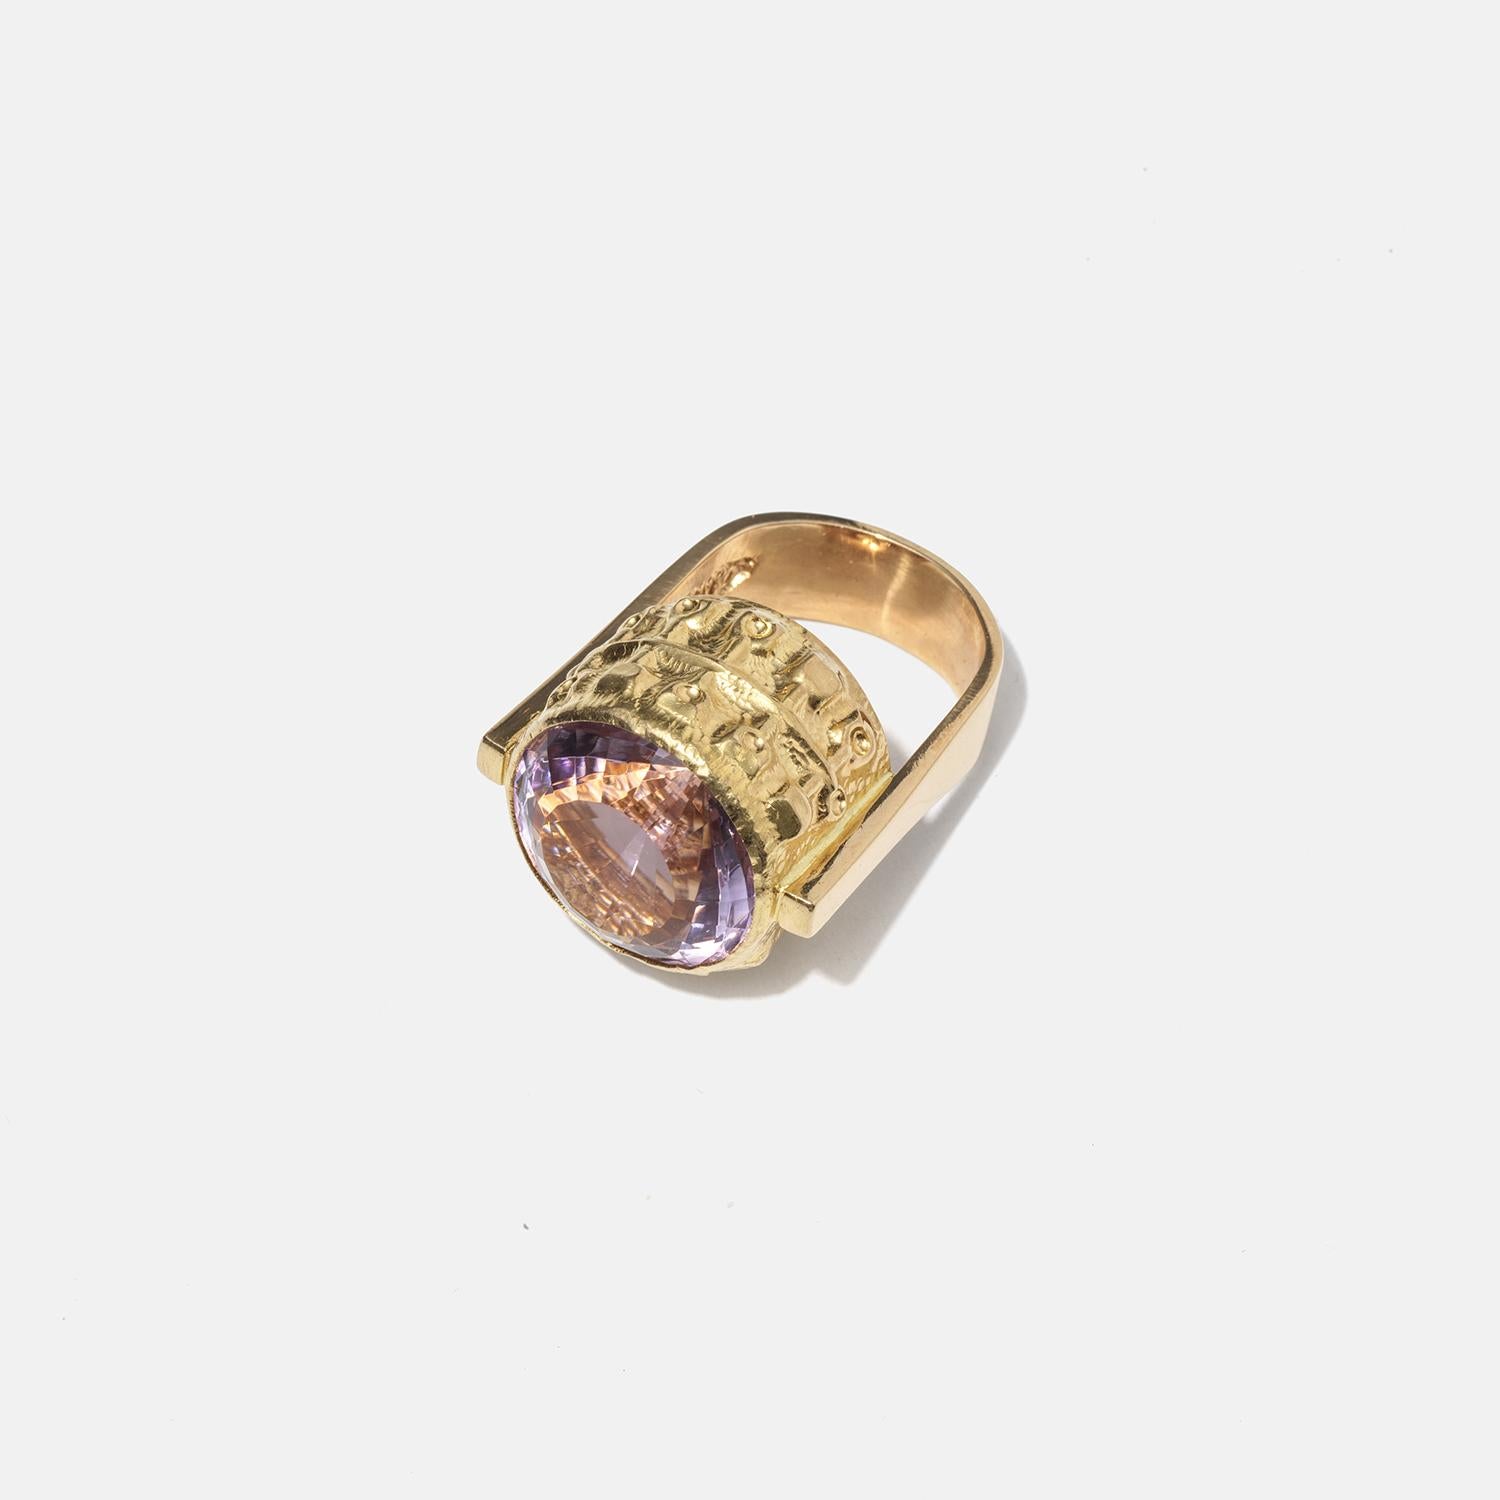 Vintage 18k Gold and Amethyst Ring by Swedish master Eric Robbert 1969 For Sale 1